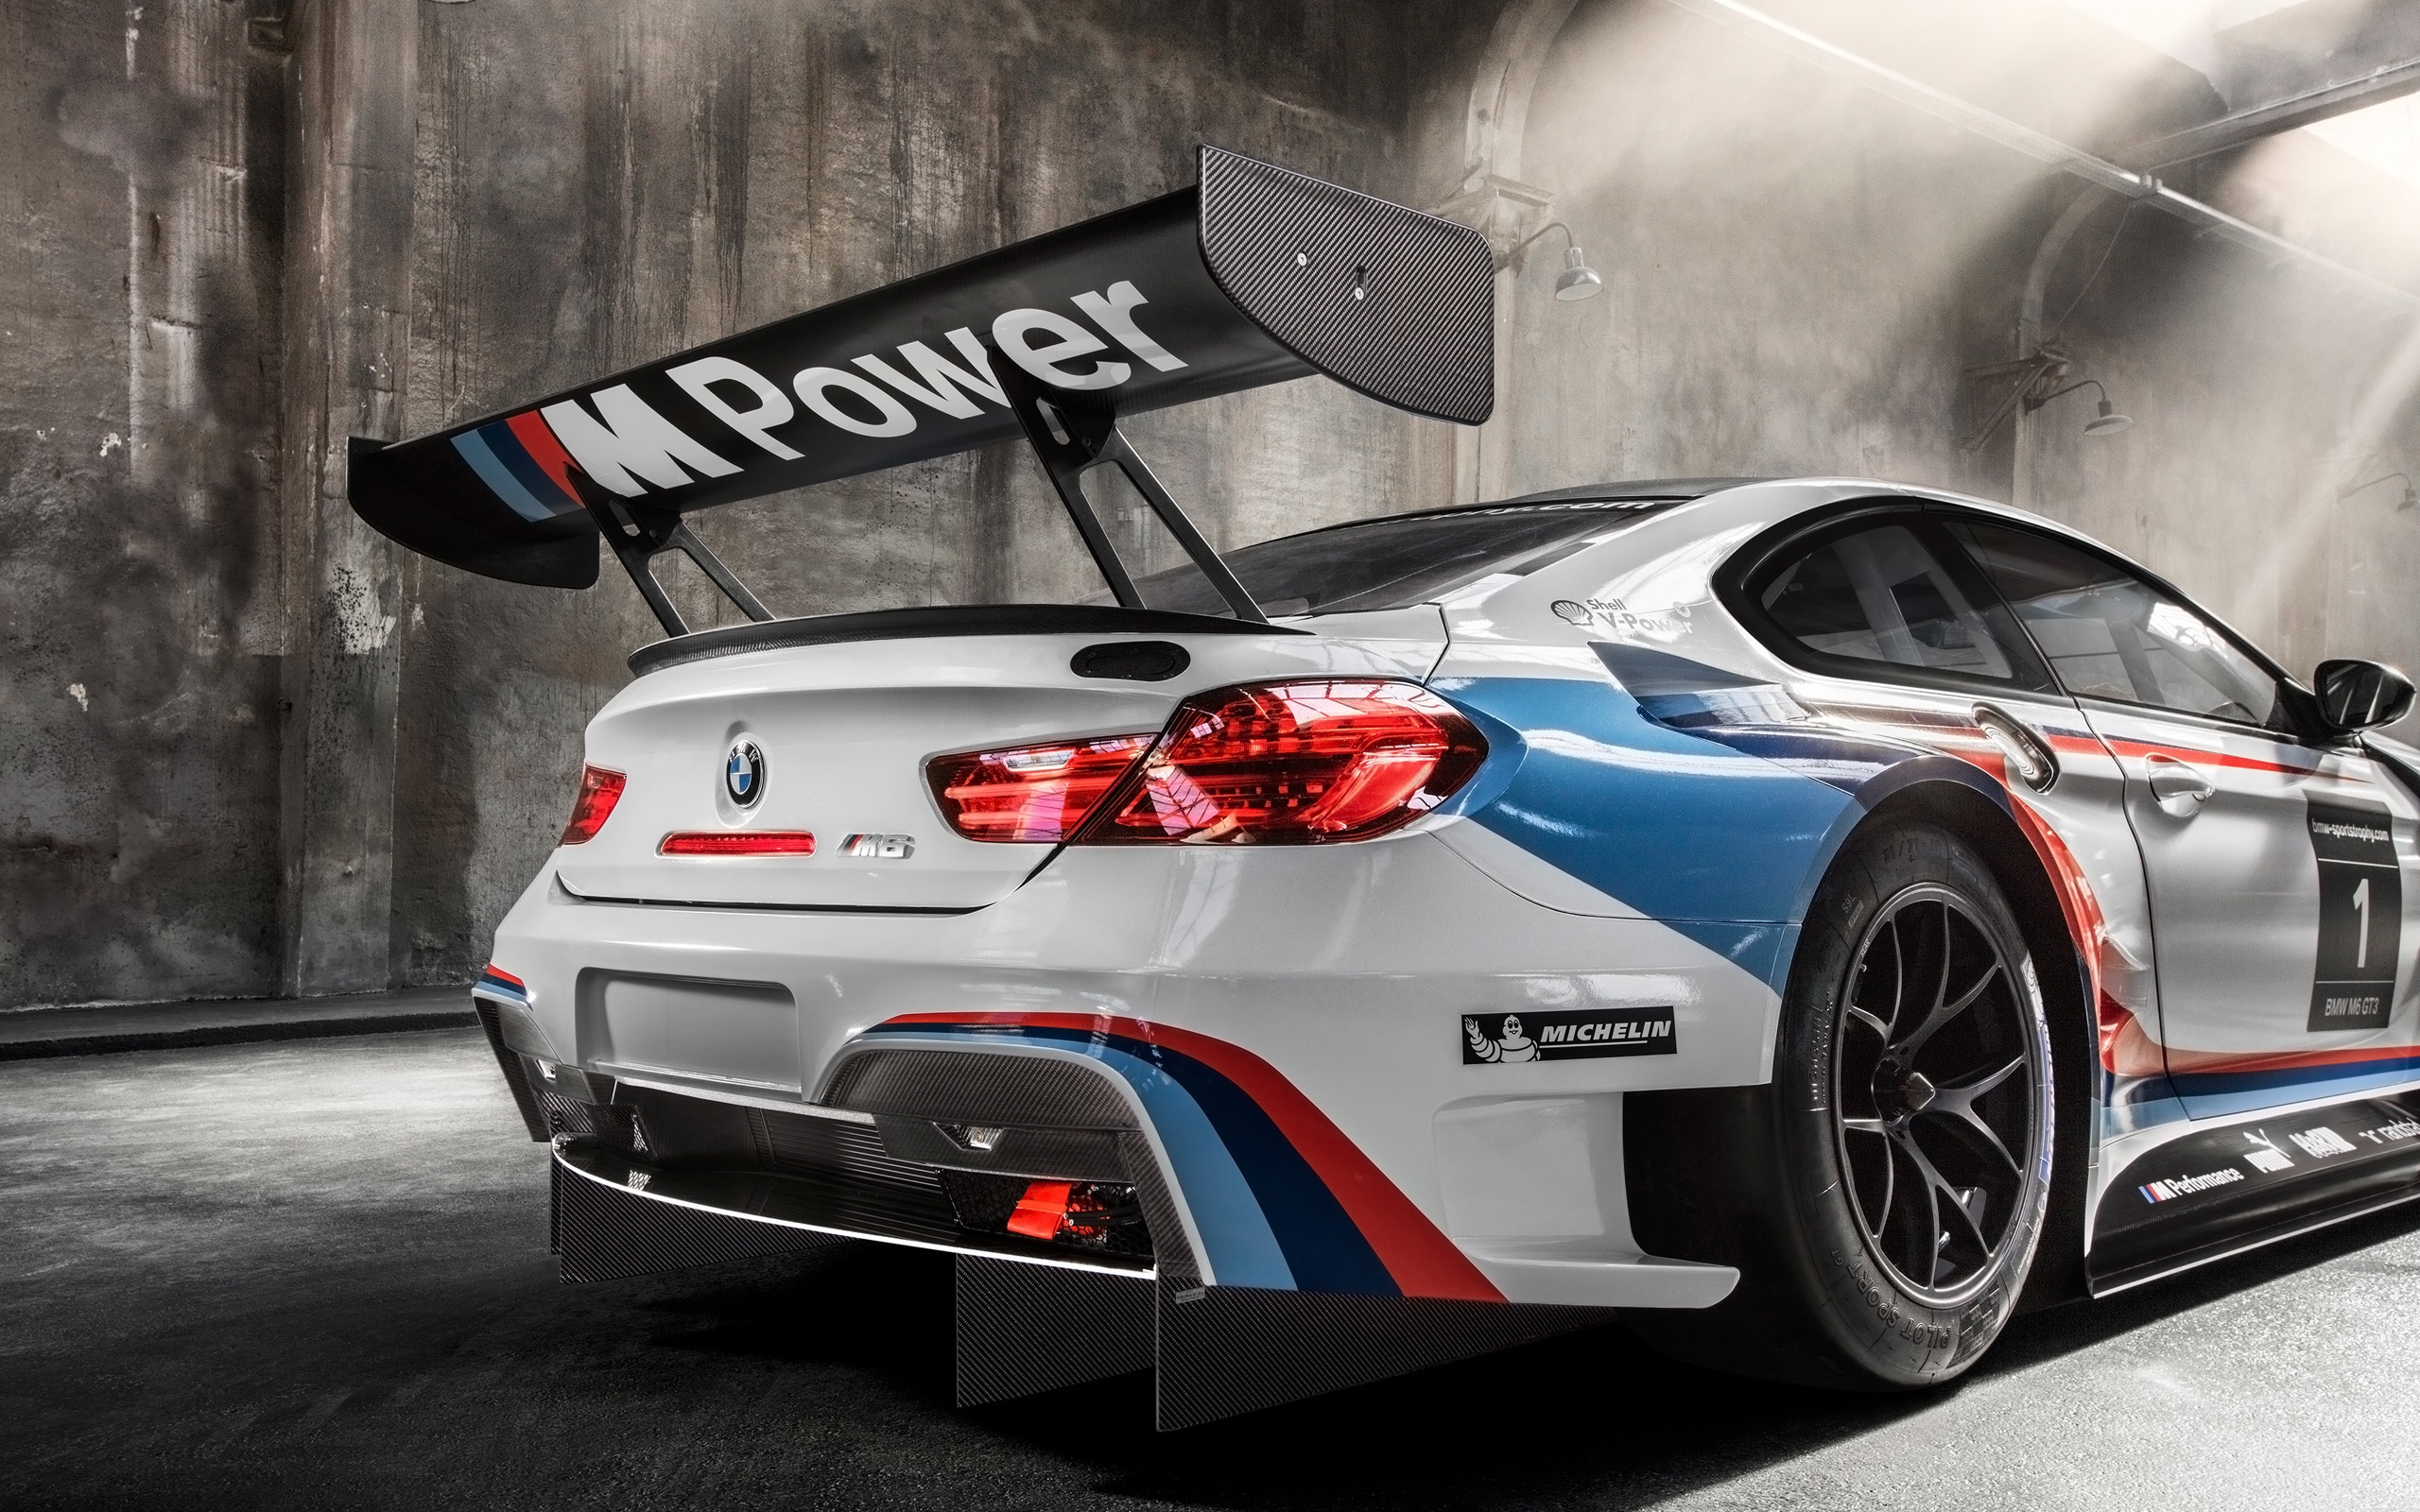 BMW M6 GT3 Wallpaper in jpg format for free download